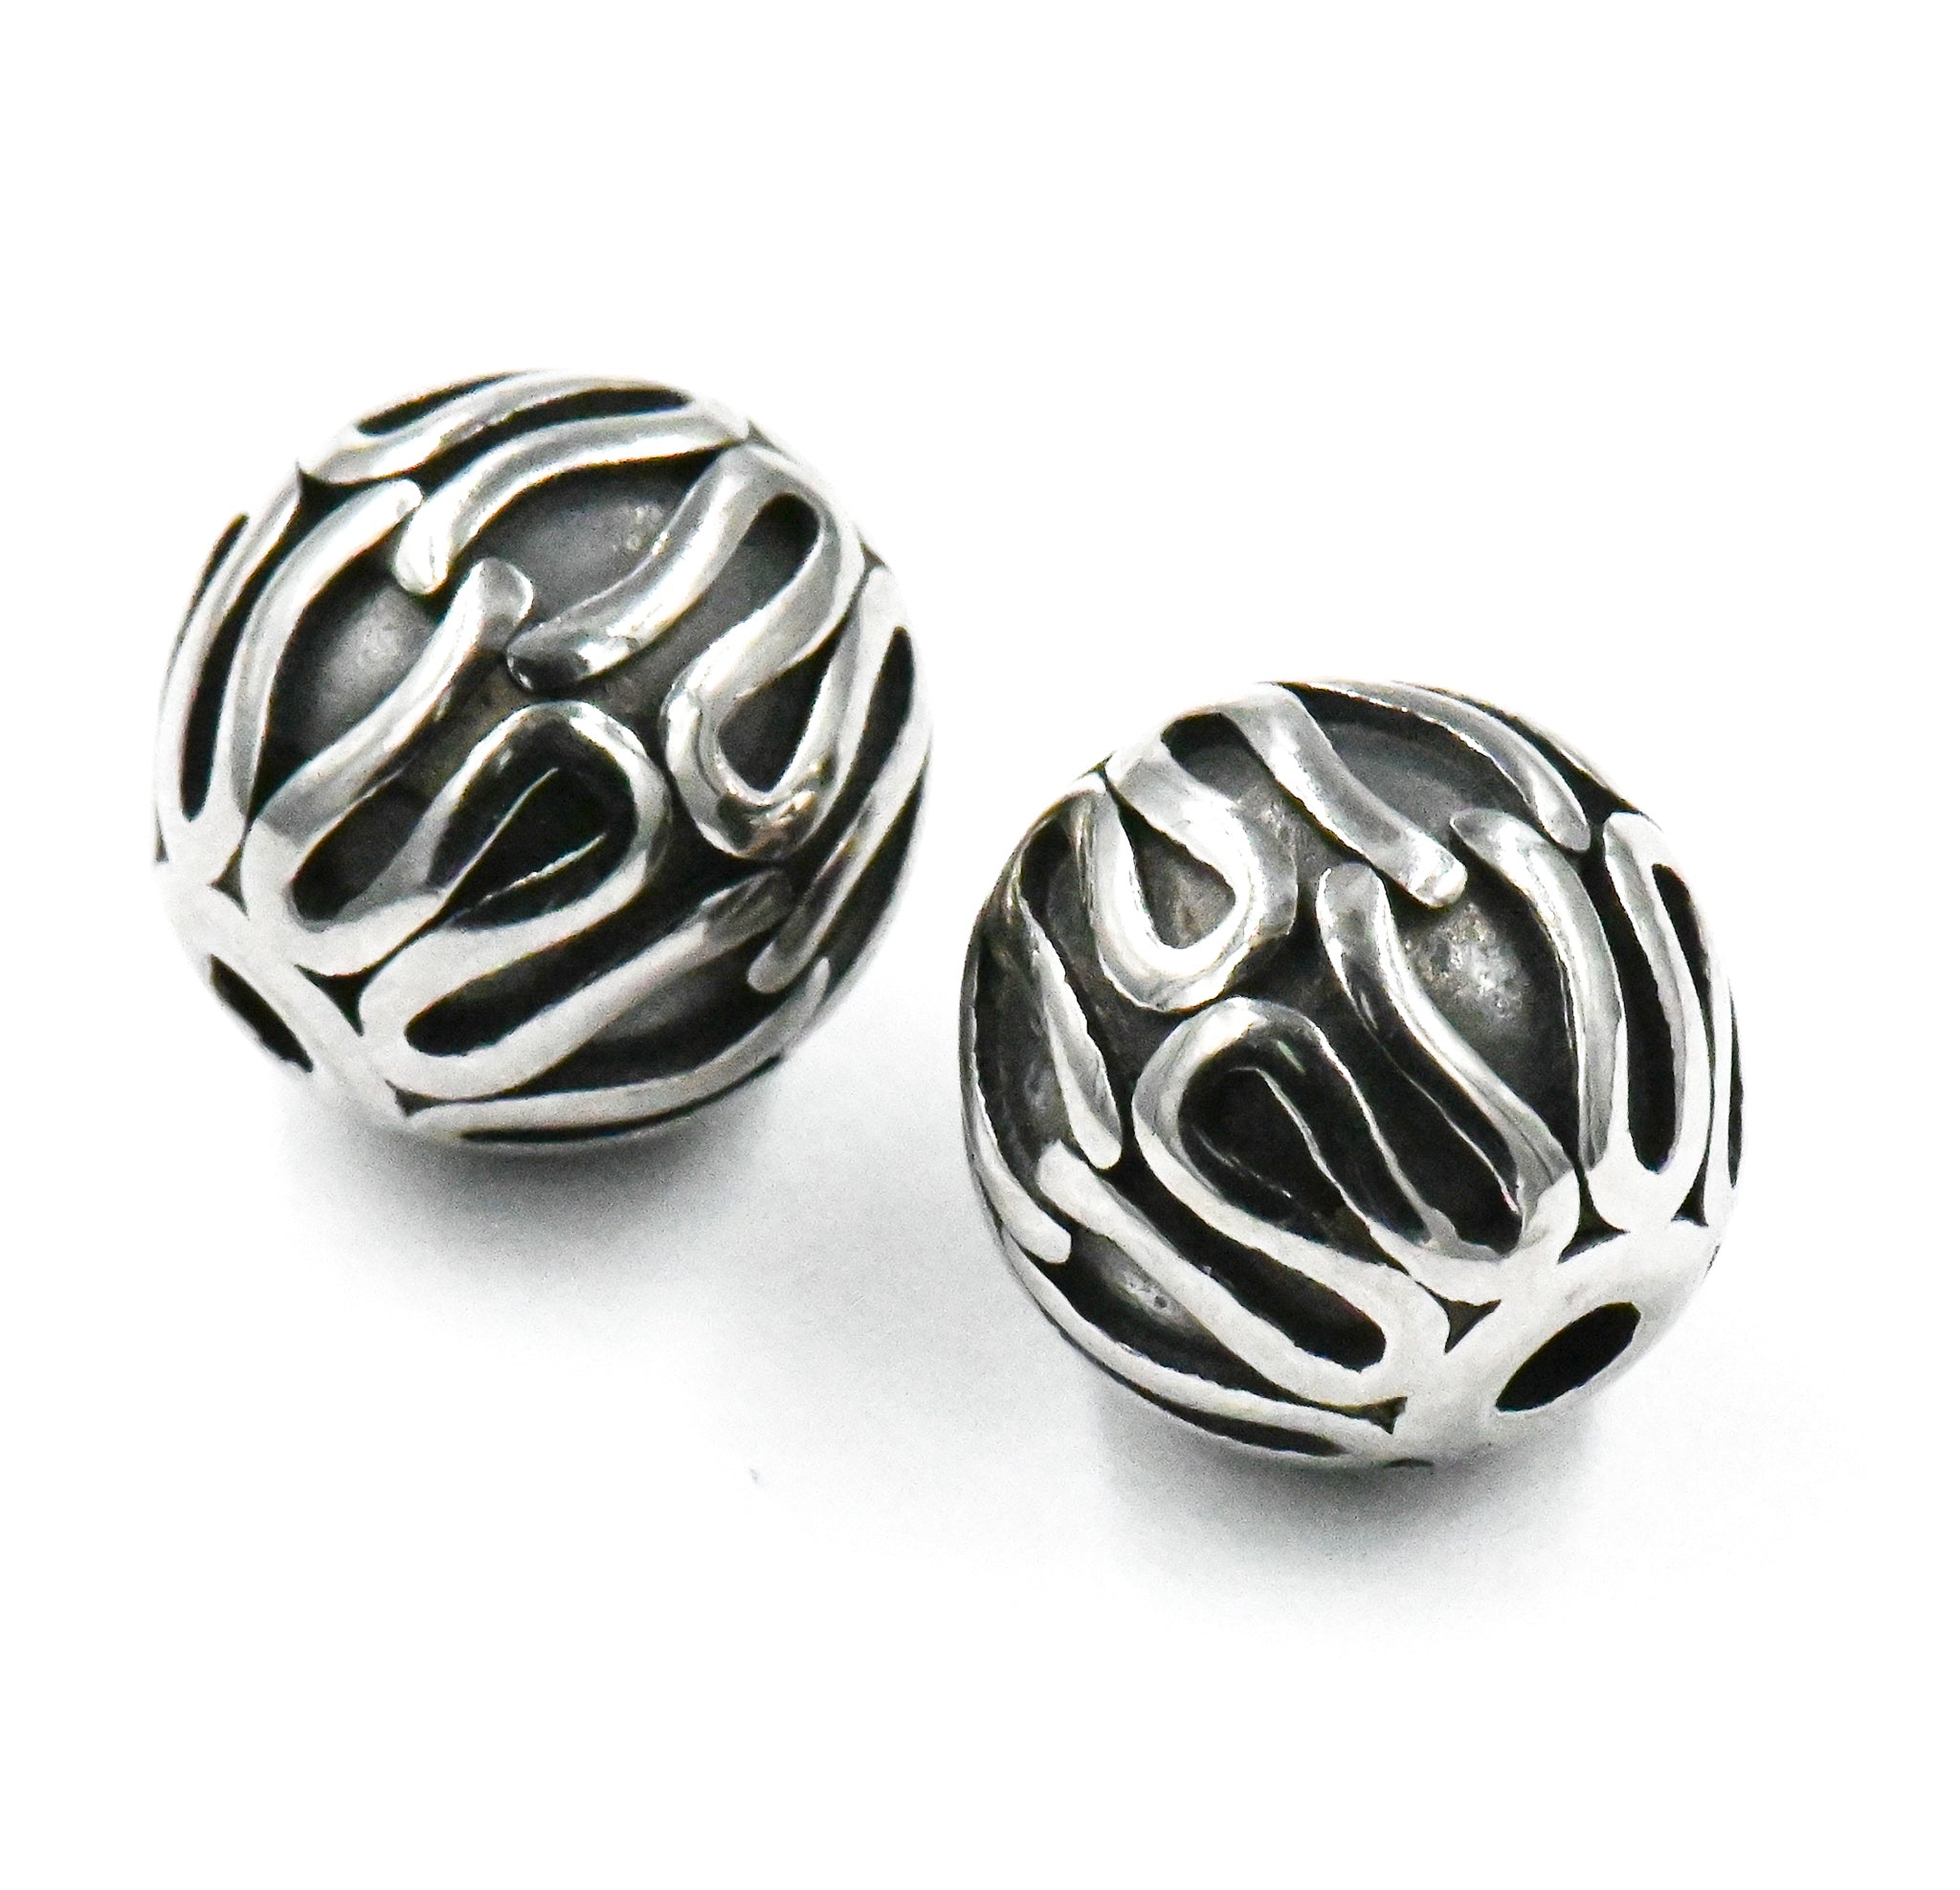 Stainless Steel Beads, 1pc,  Large Hole Beads, Column, 9.5mm Antique Silver